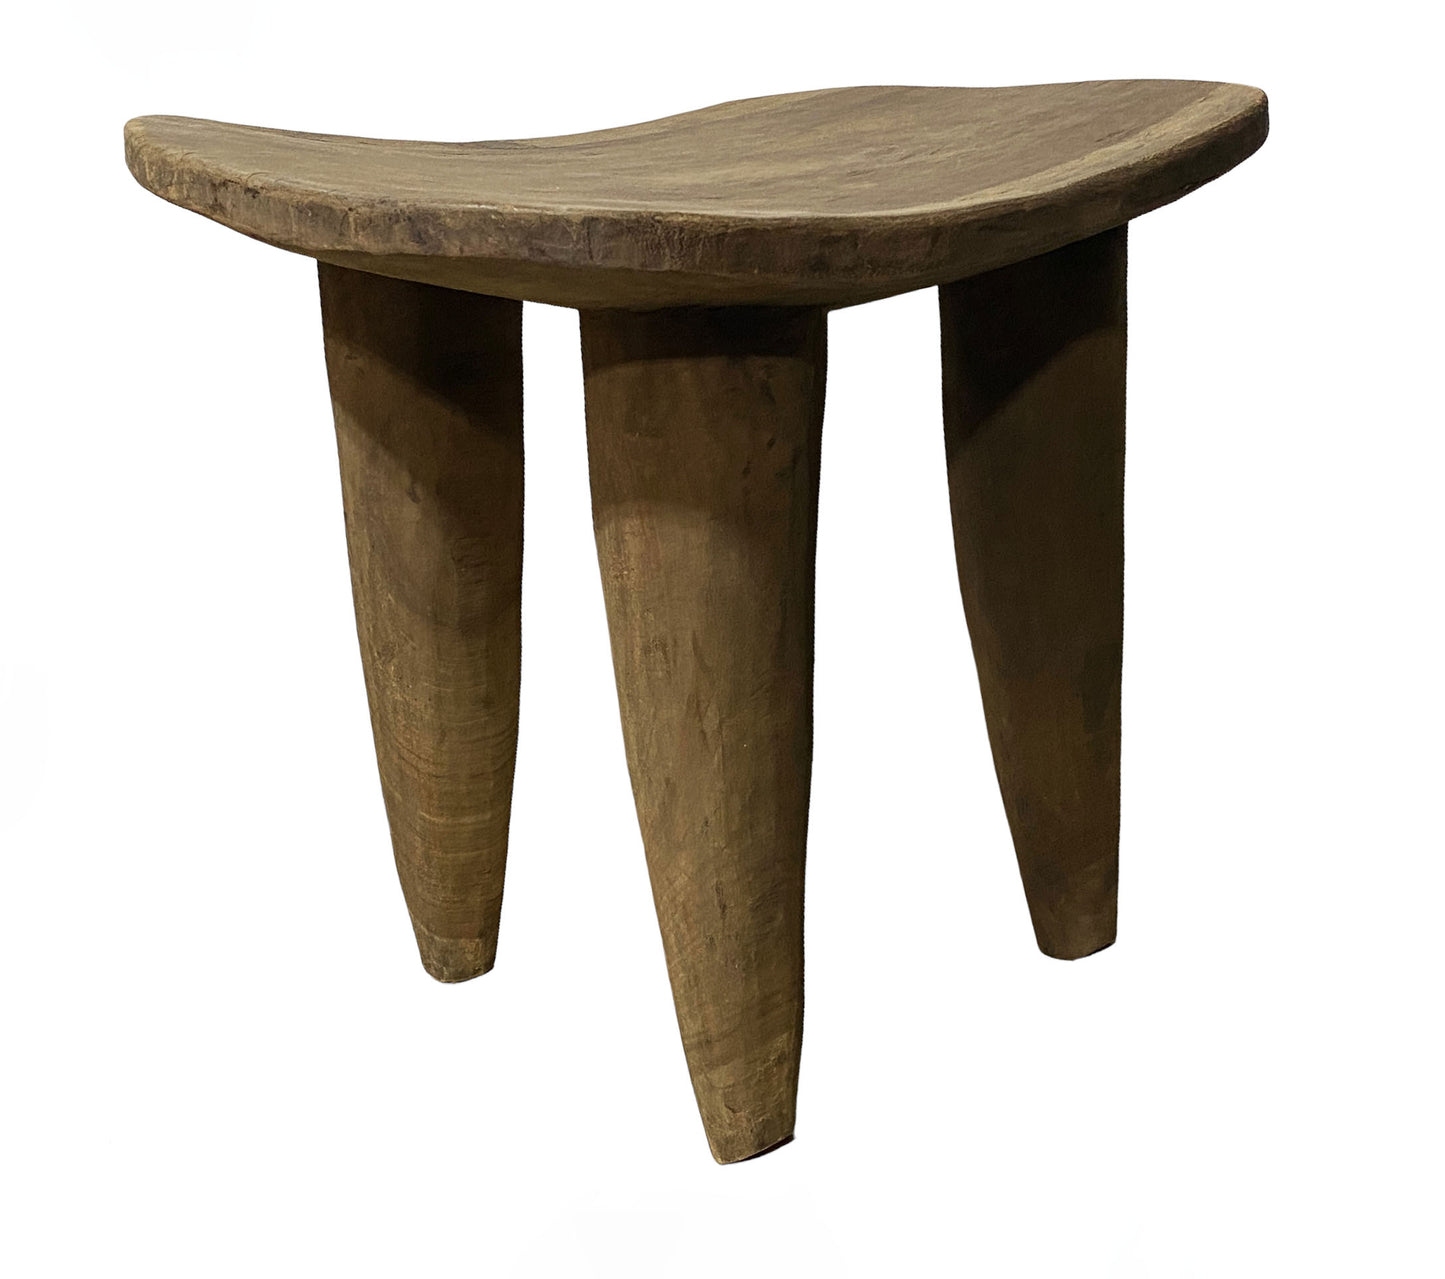 # 5528 Superb Rustic African Senufo Stool / Table  I coast 19.5" H by 20.5" w